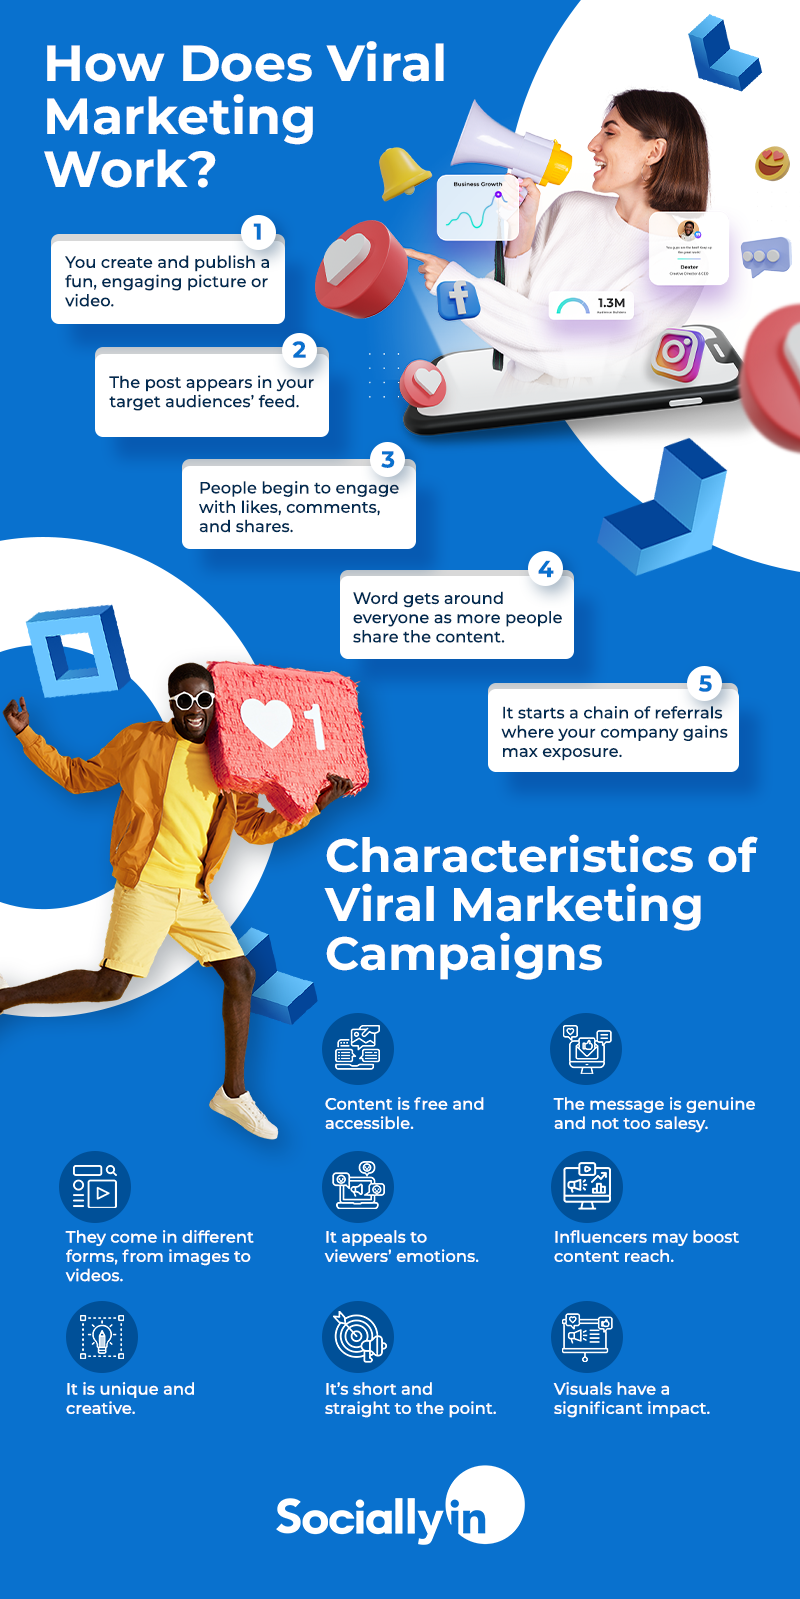 Viral Marketing Infographic describes how it works and characteristics of viral marketing campaigns 